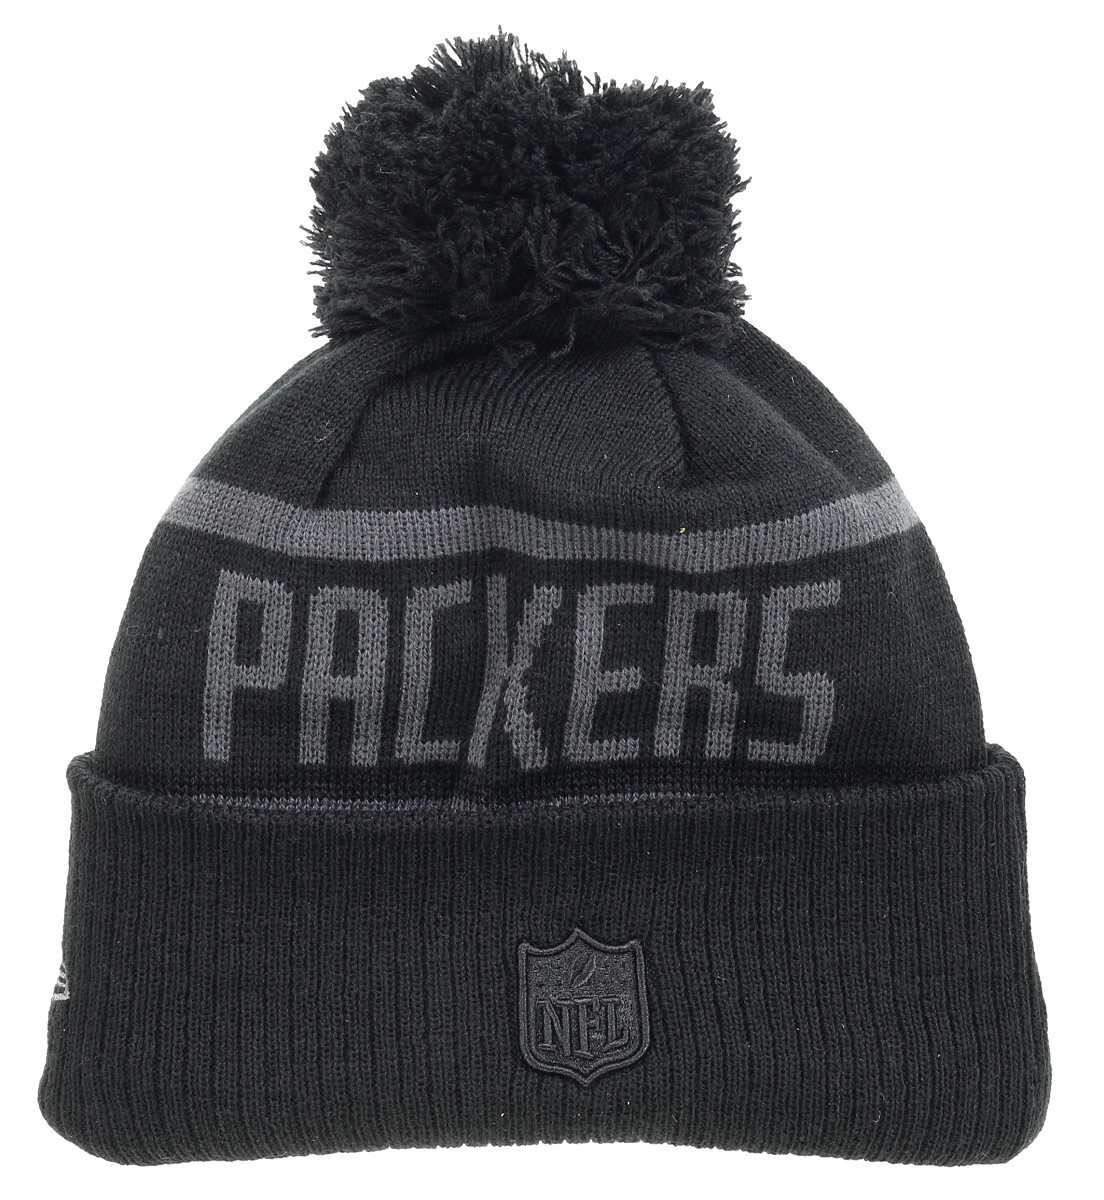 Green Bay Packers NFL 2017 Black Collection Beanie New Era